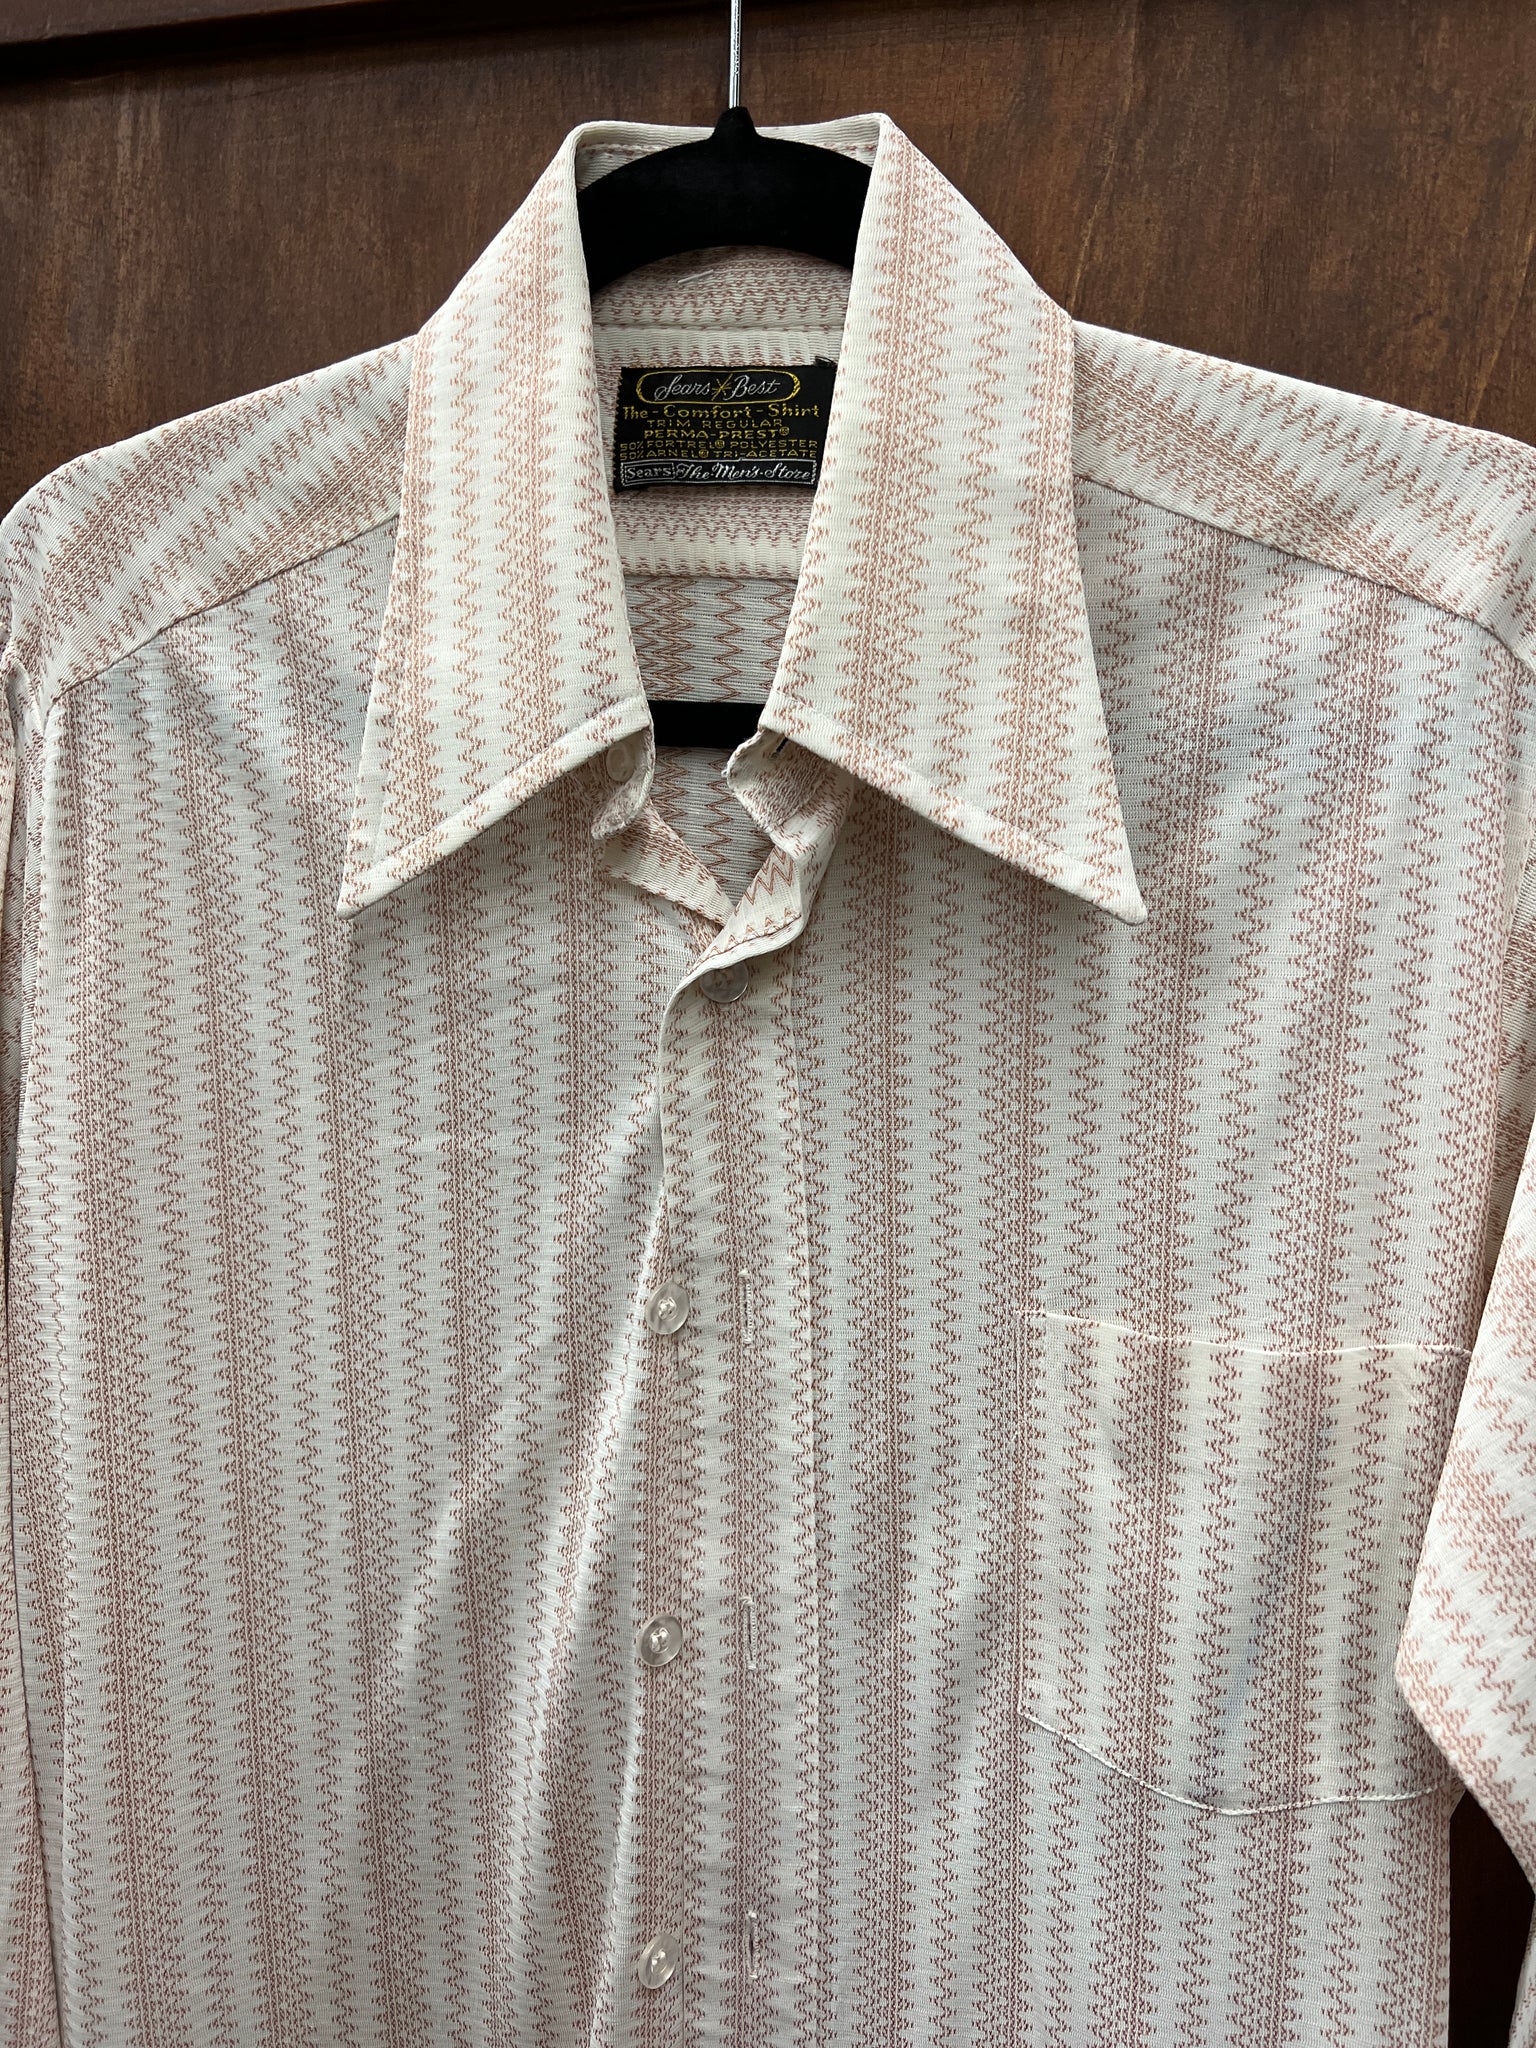 1970s MENS TOP- Sears Best soft poly cream w/ brown zigzag l/s